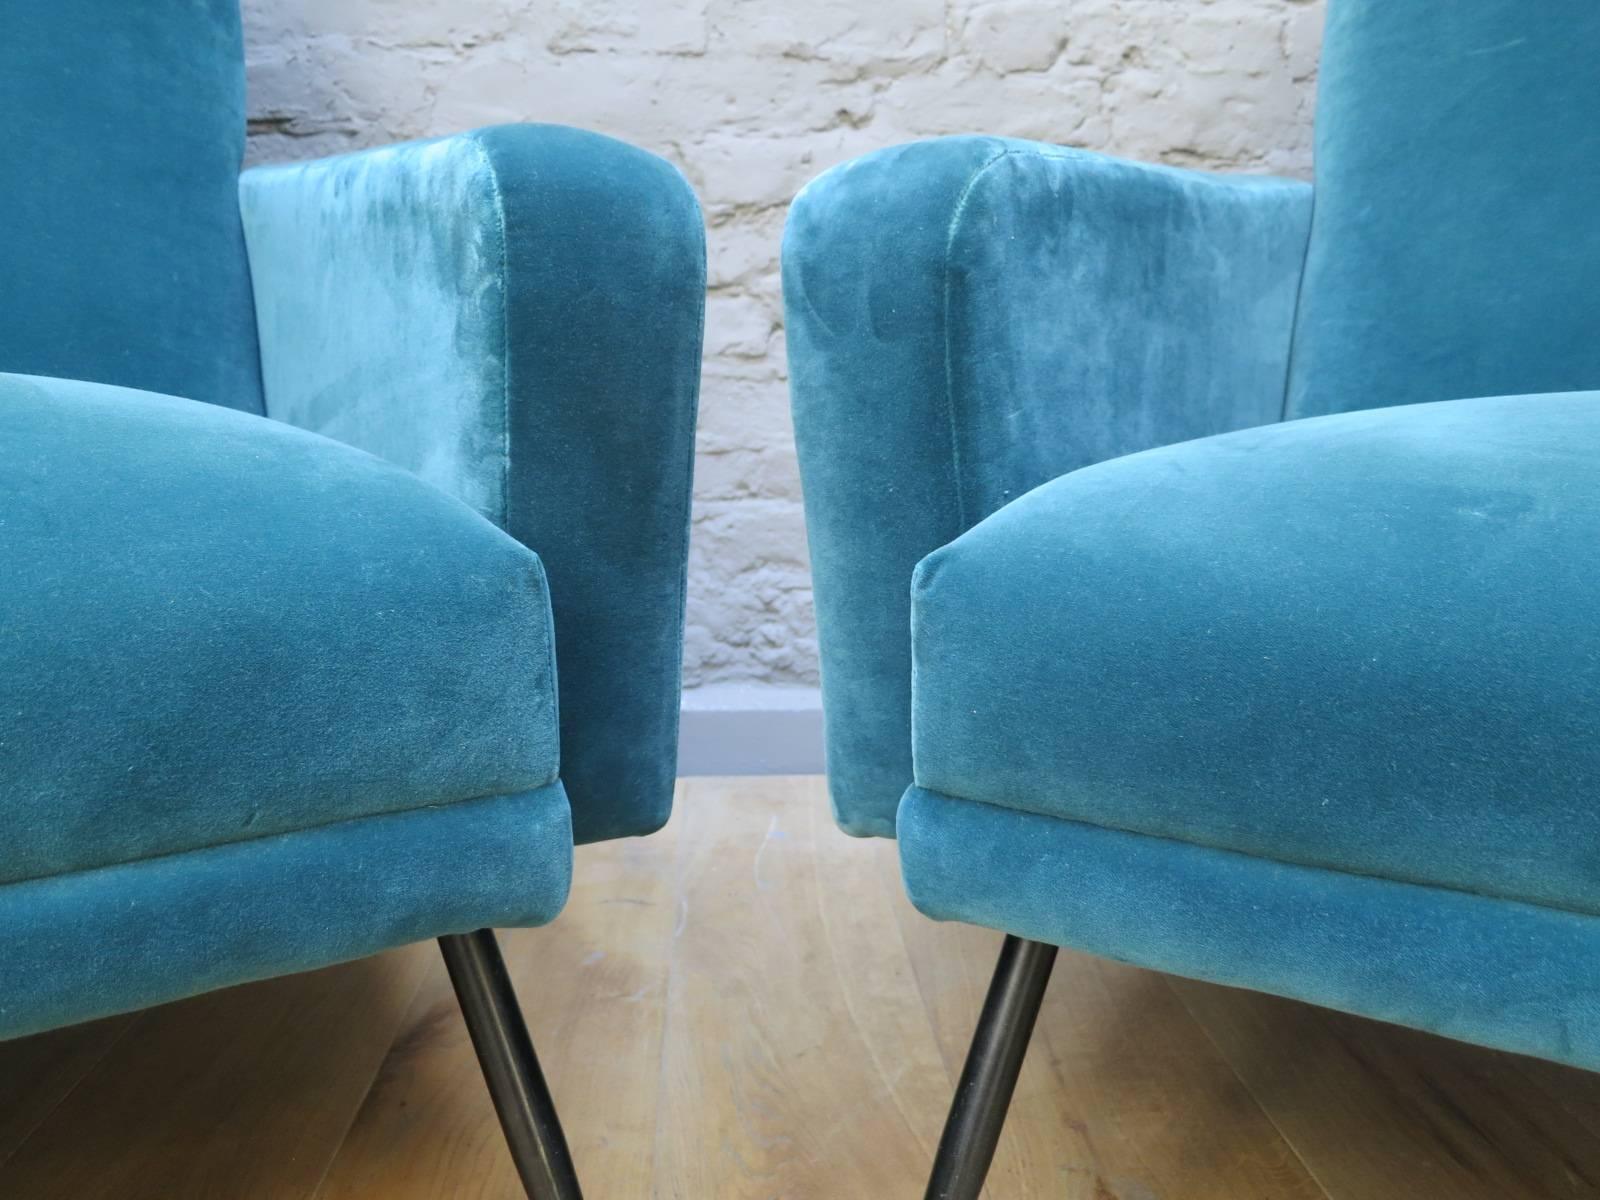 Re upholstered in teal velvet, this angular pair of armchairs with their simple, clean line design, typical of that era.